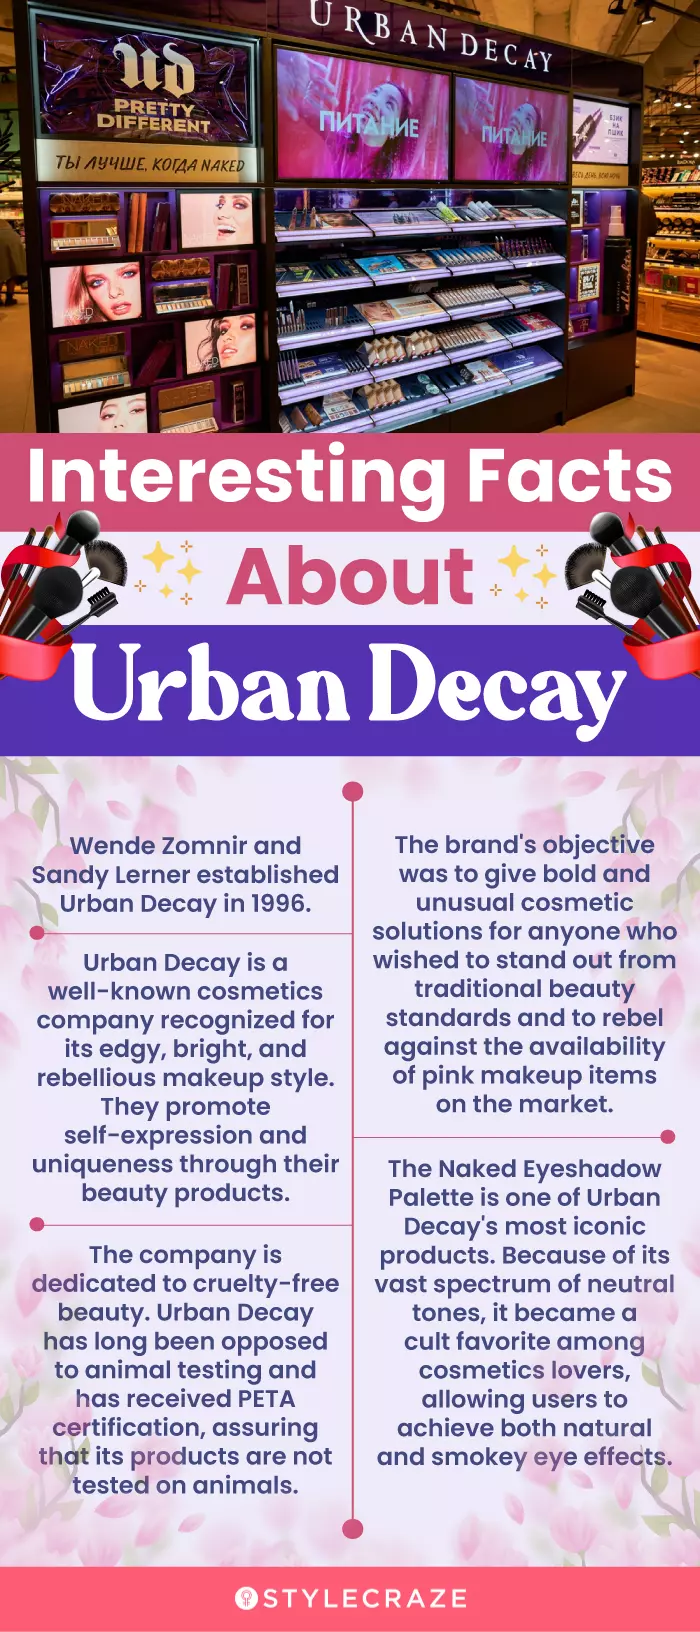  Interesting Facts About Urban Decay (infographic)